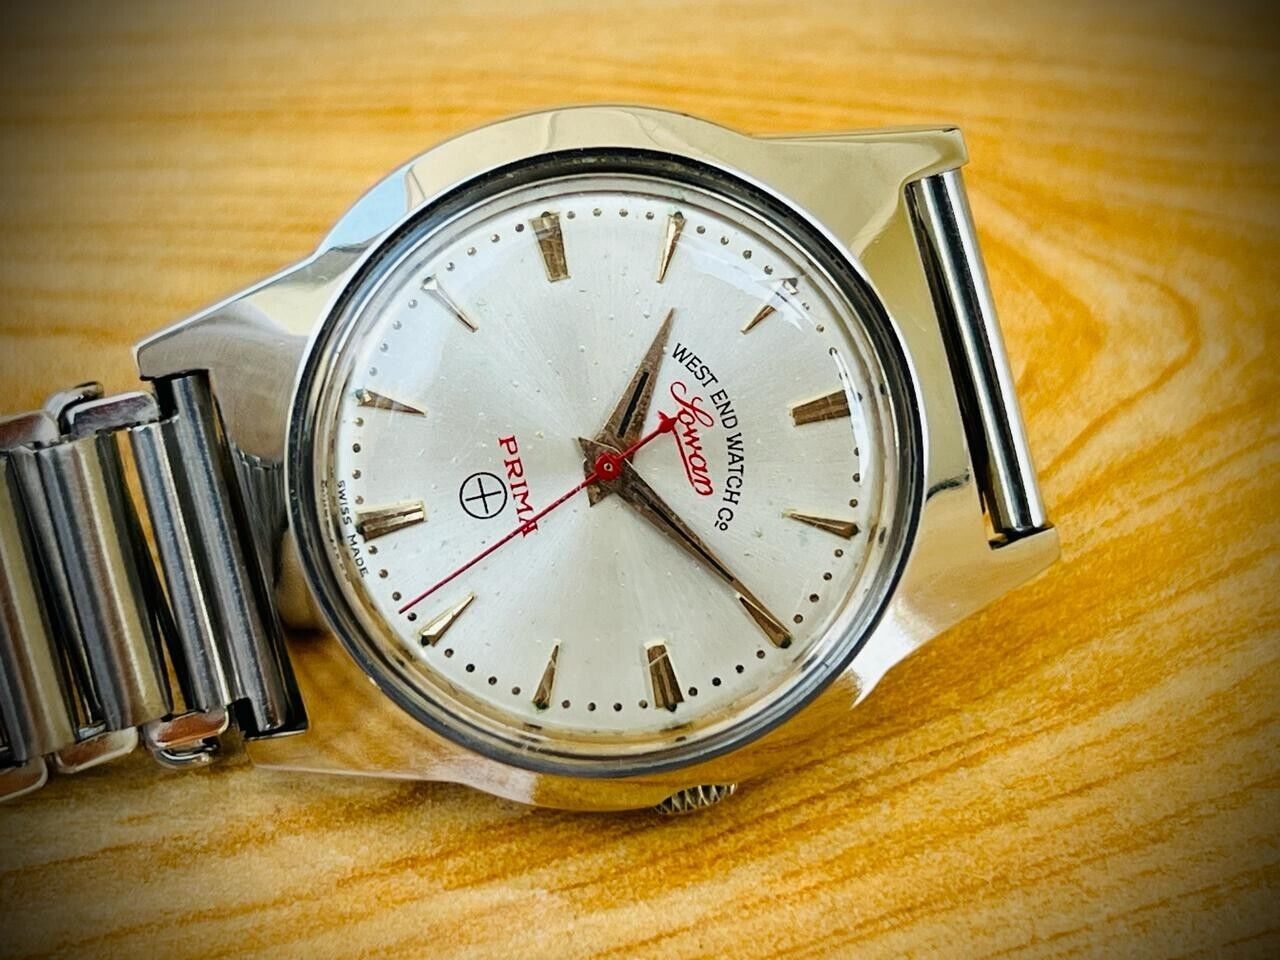 Vintage West End NOS Manual Wind Gents Watch 35mm, Swiss Made